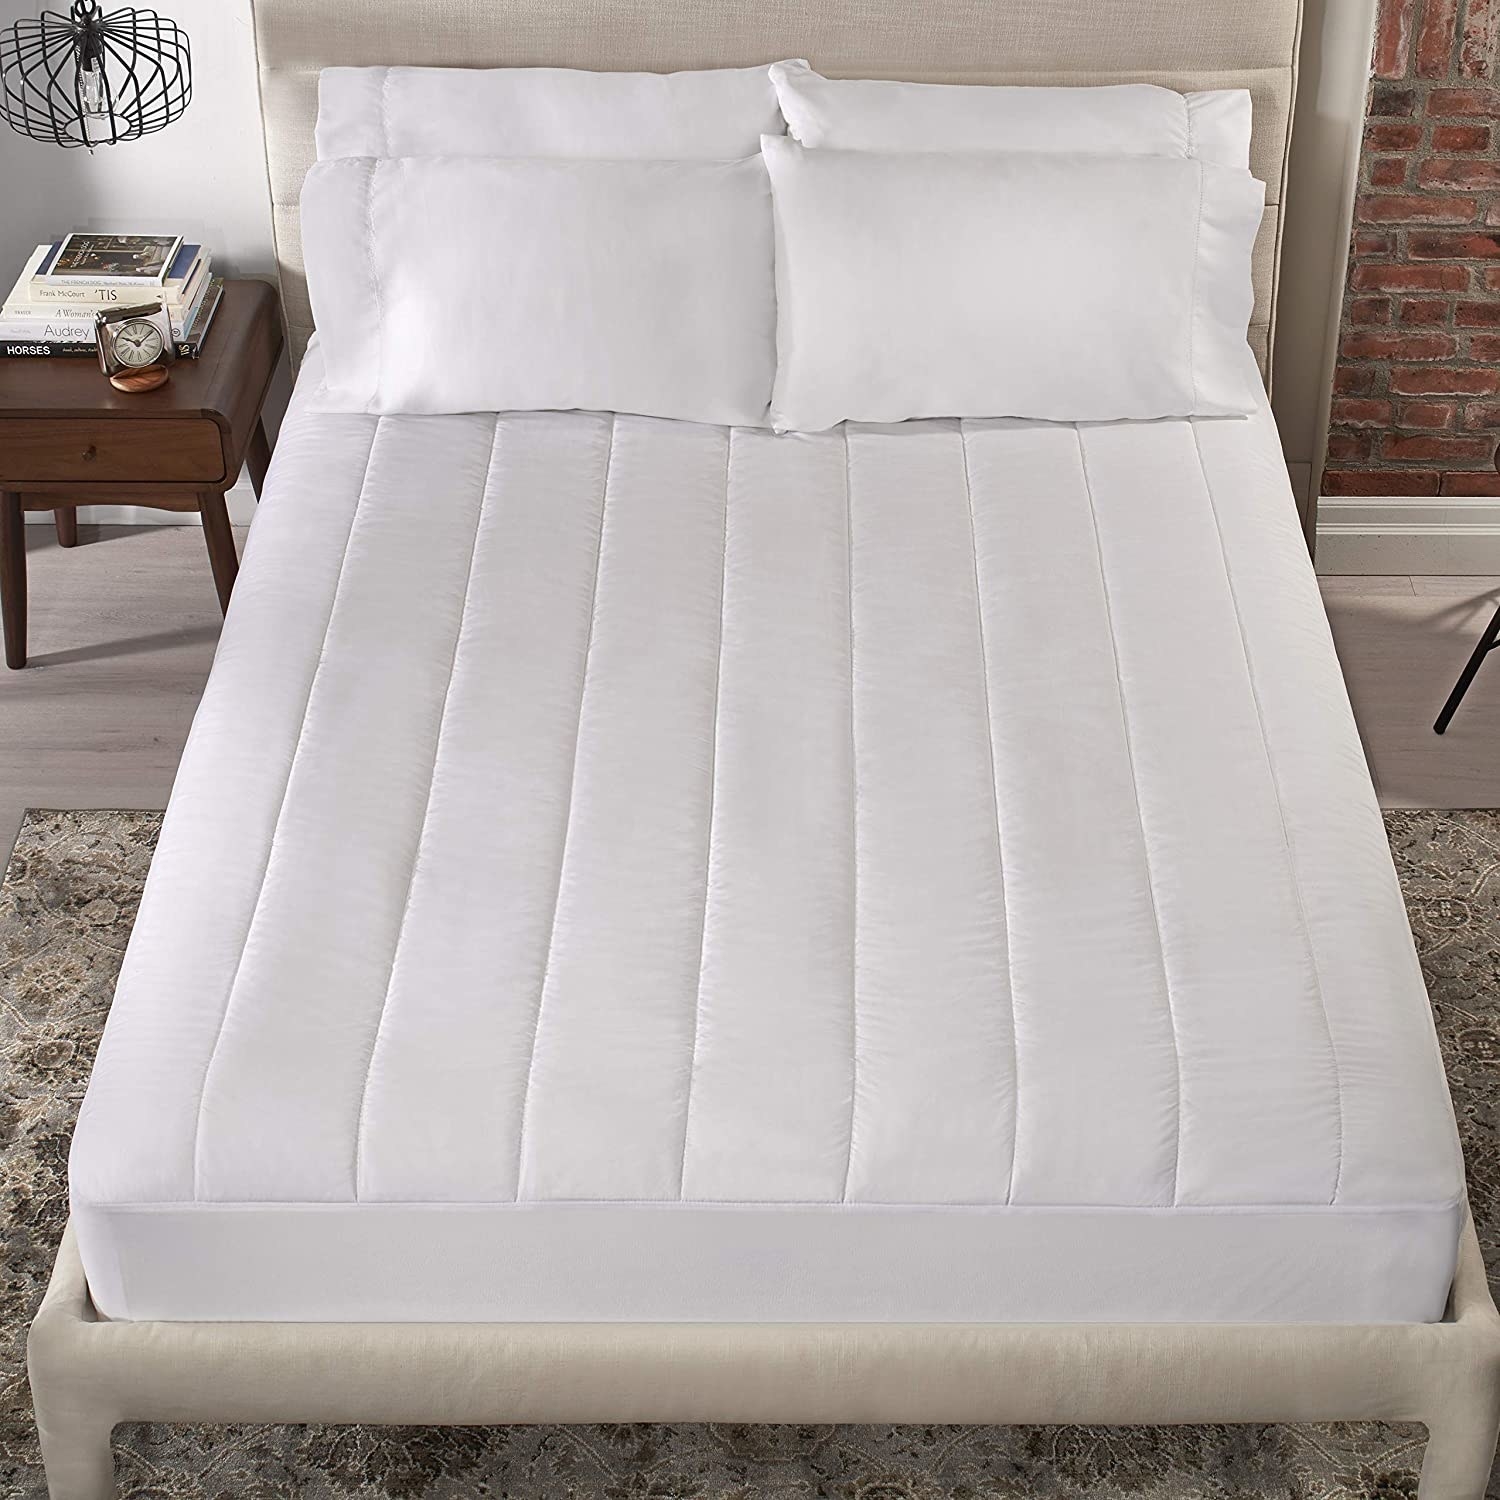 The mattress cover on top of a bed